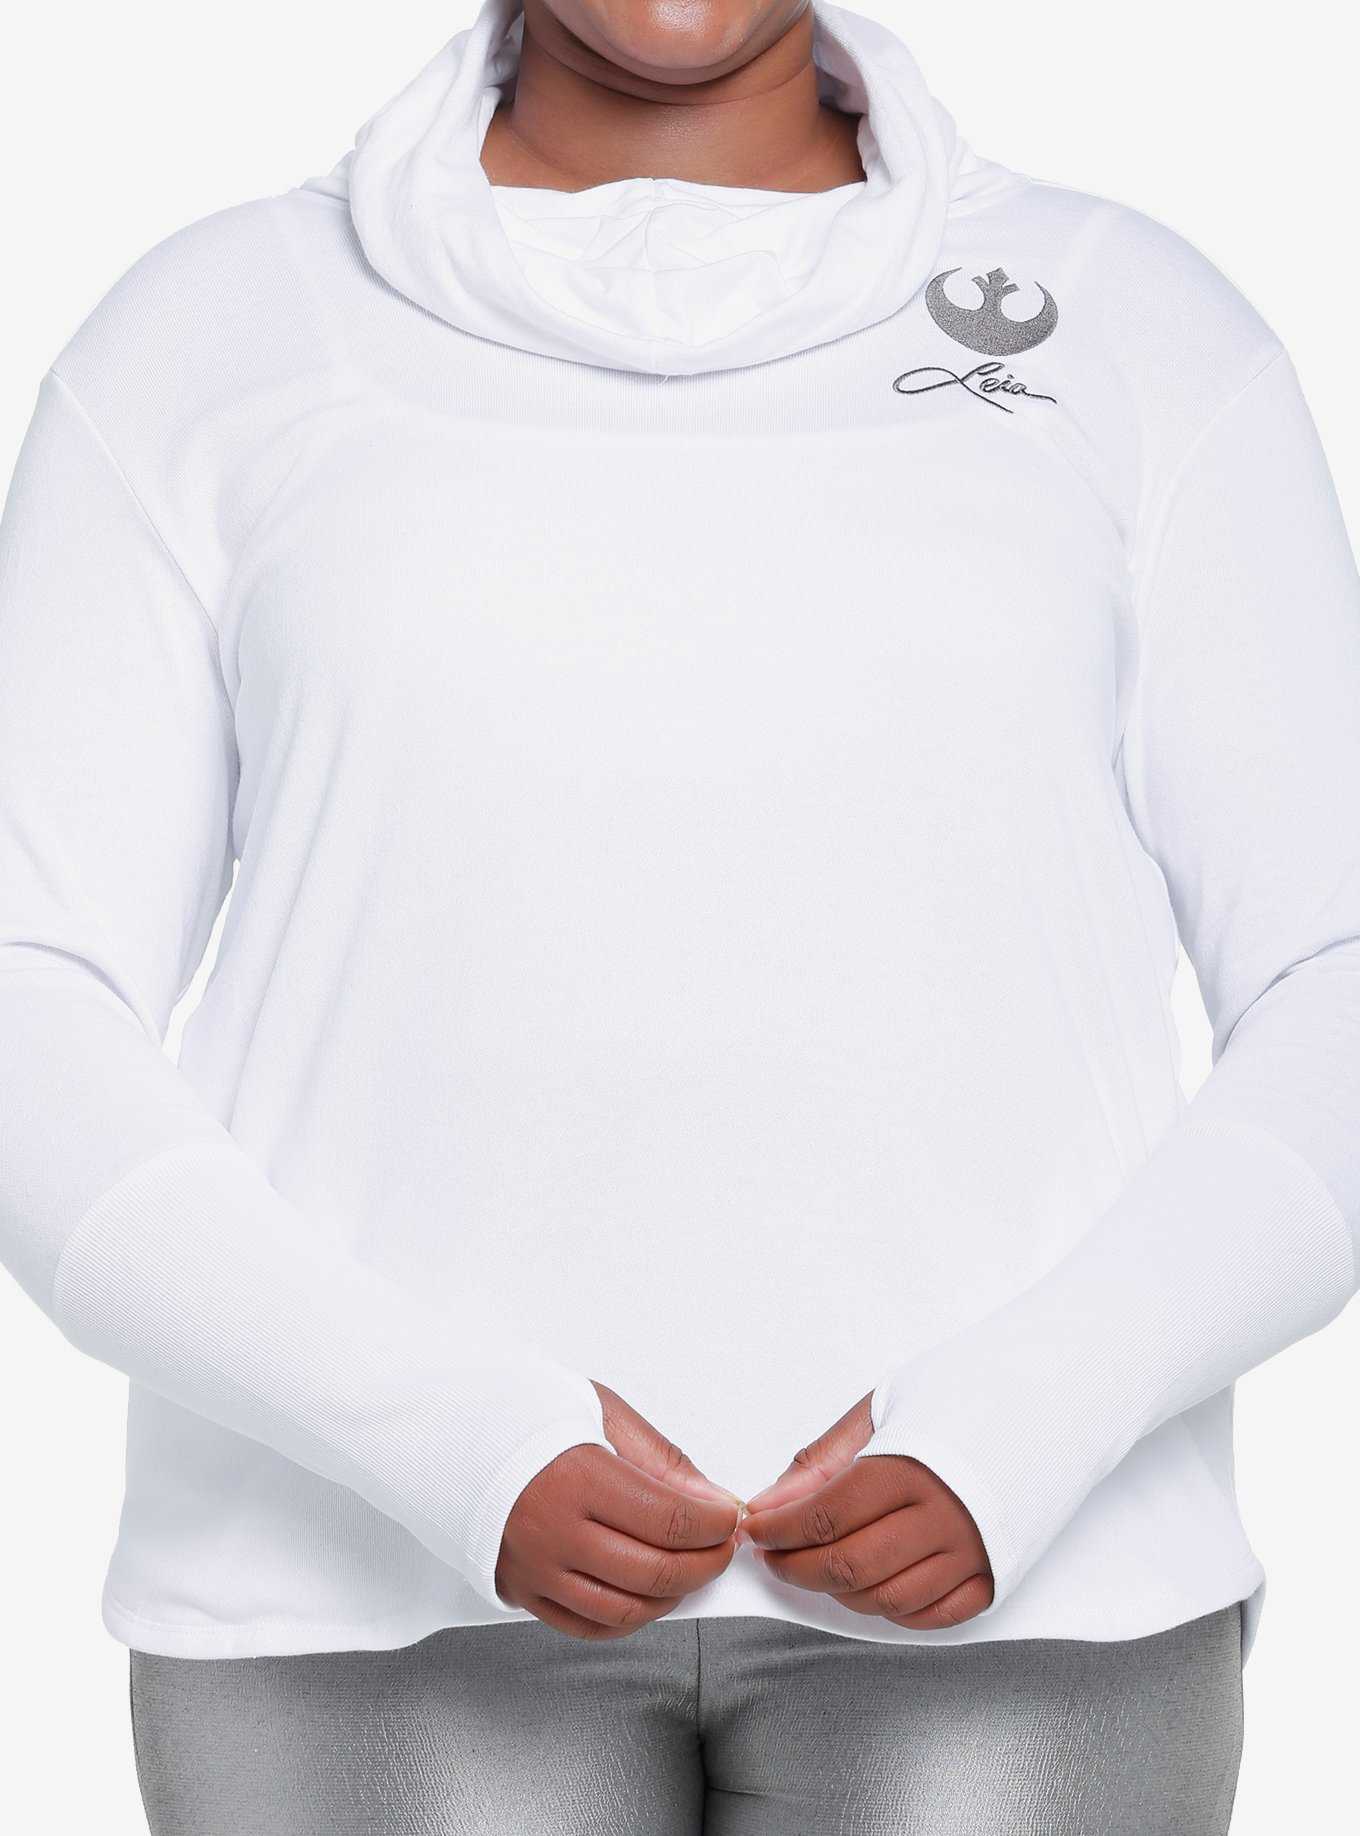 Her Universe Star Wars Princess Leia Cowl Long-Sleeve Top Plus Size Her Universe Exclusive, , hi-res